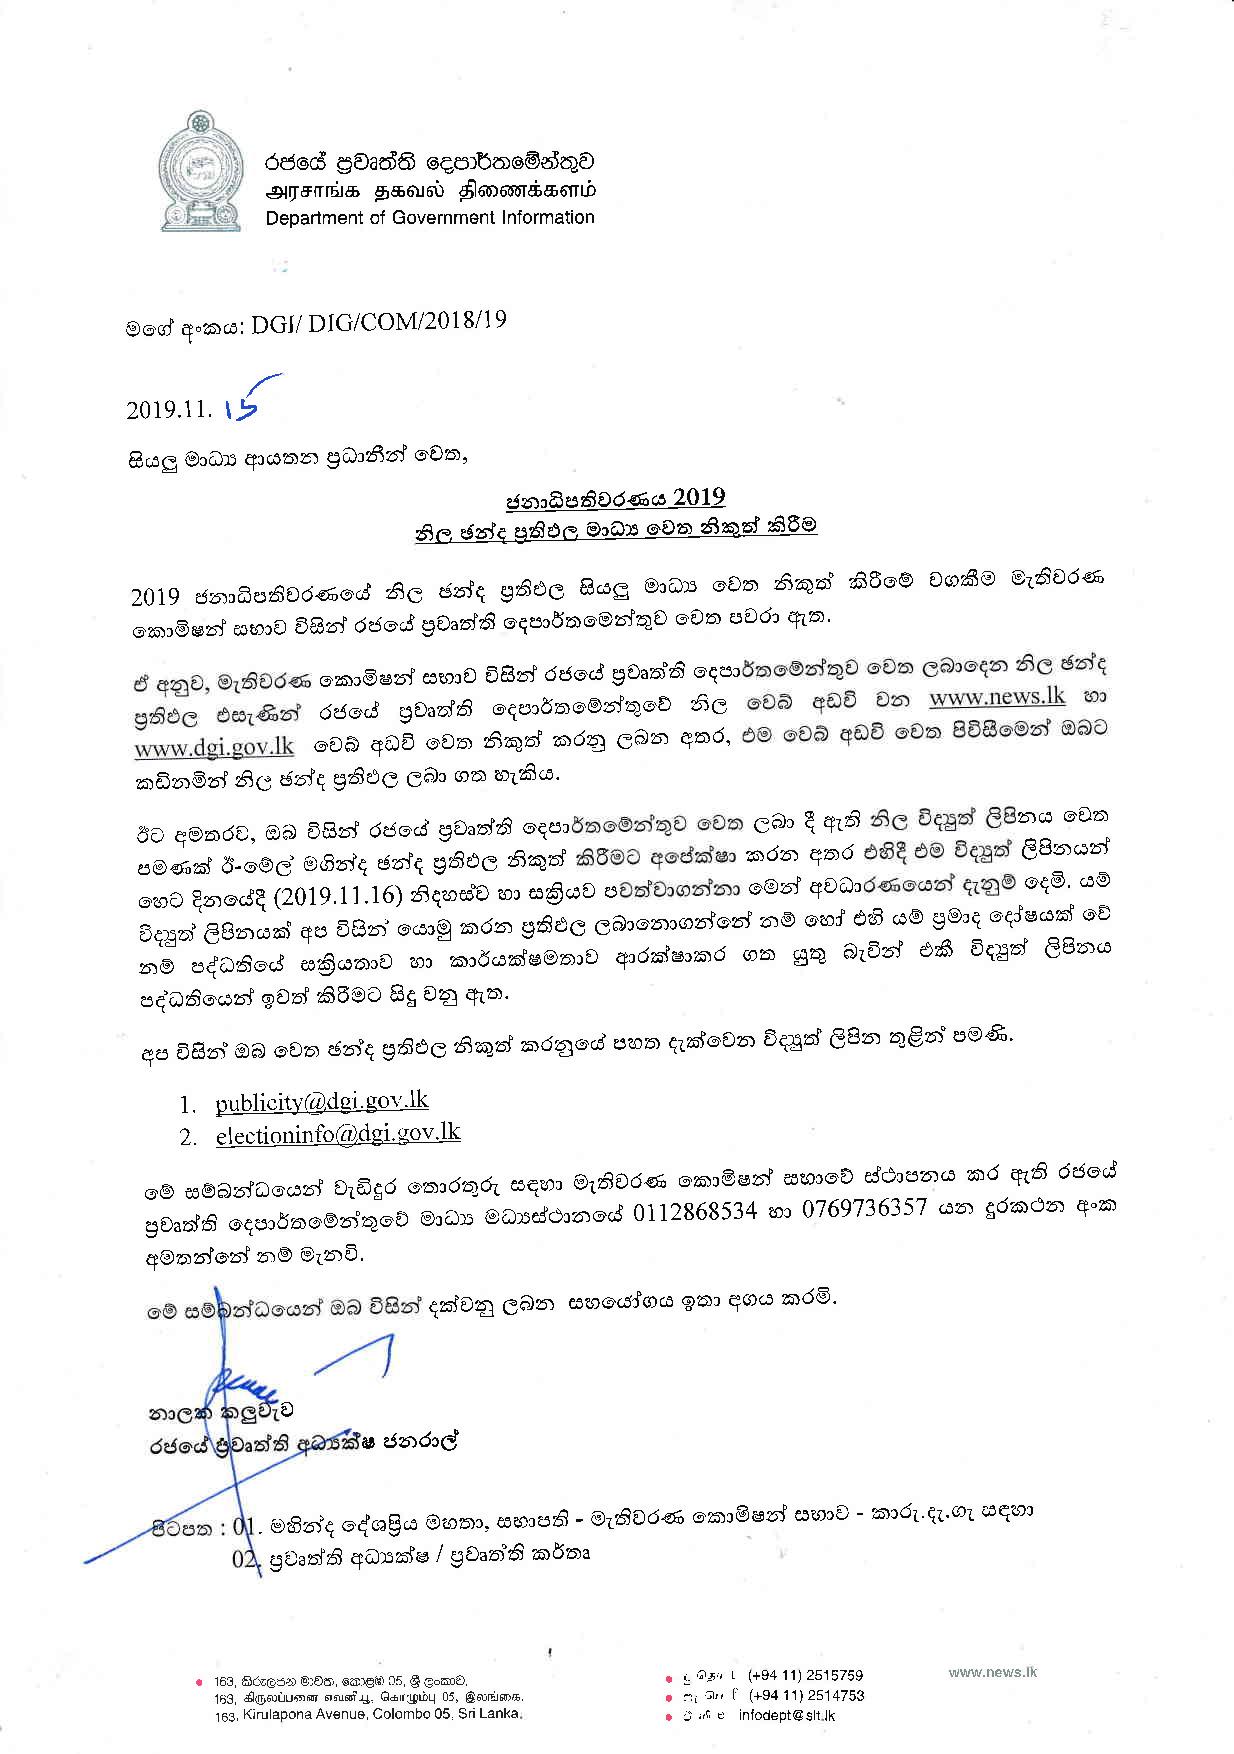 Letter on Issuing Election Results 1 page 001